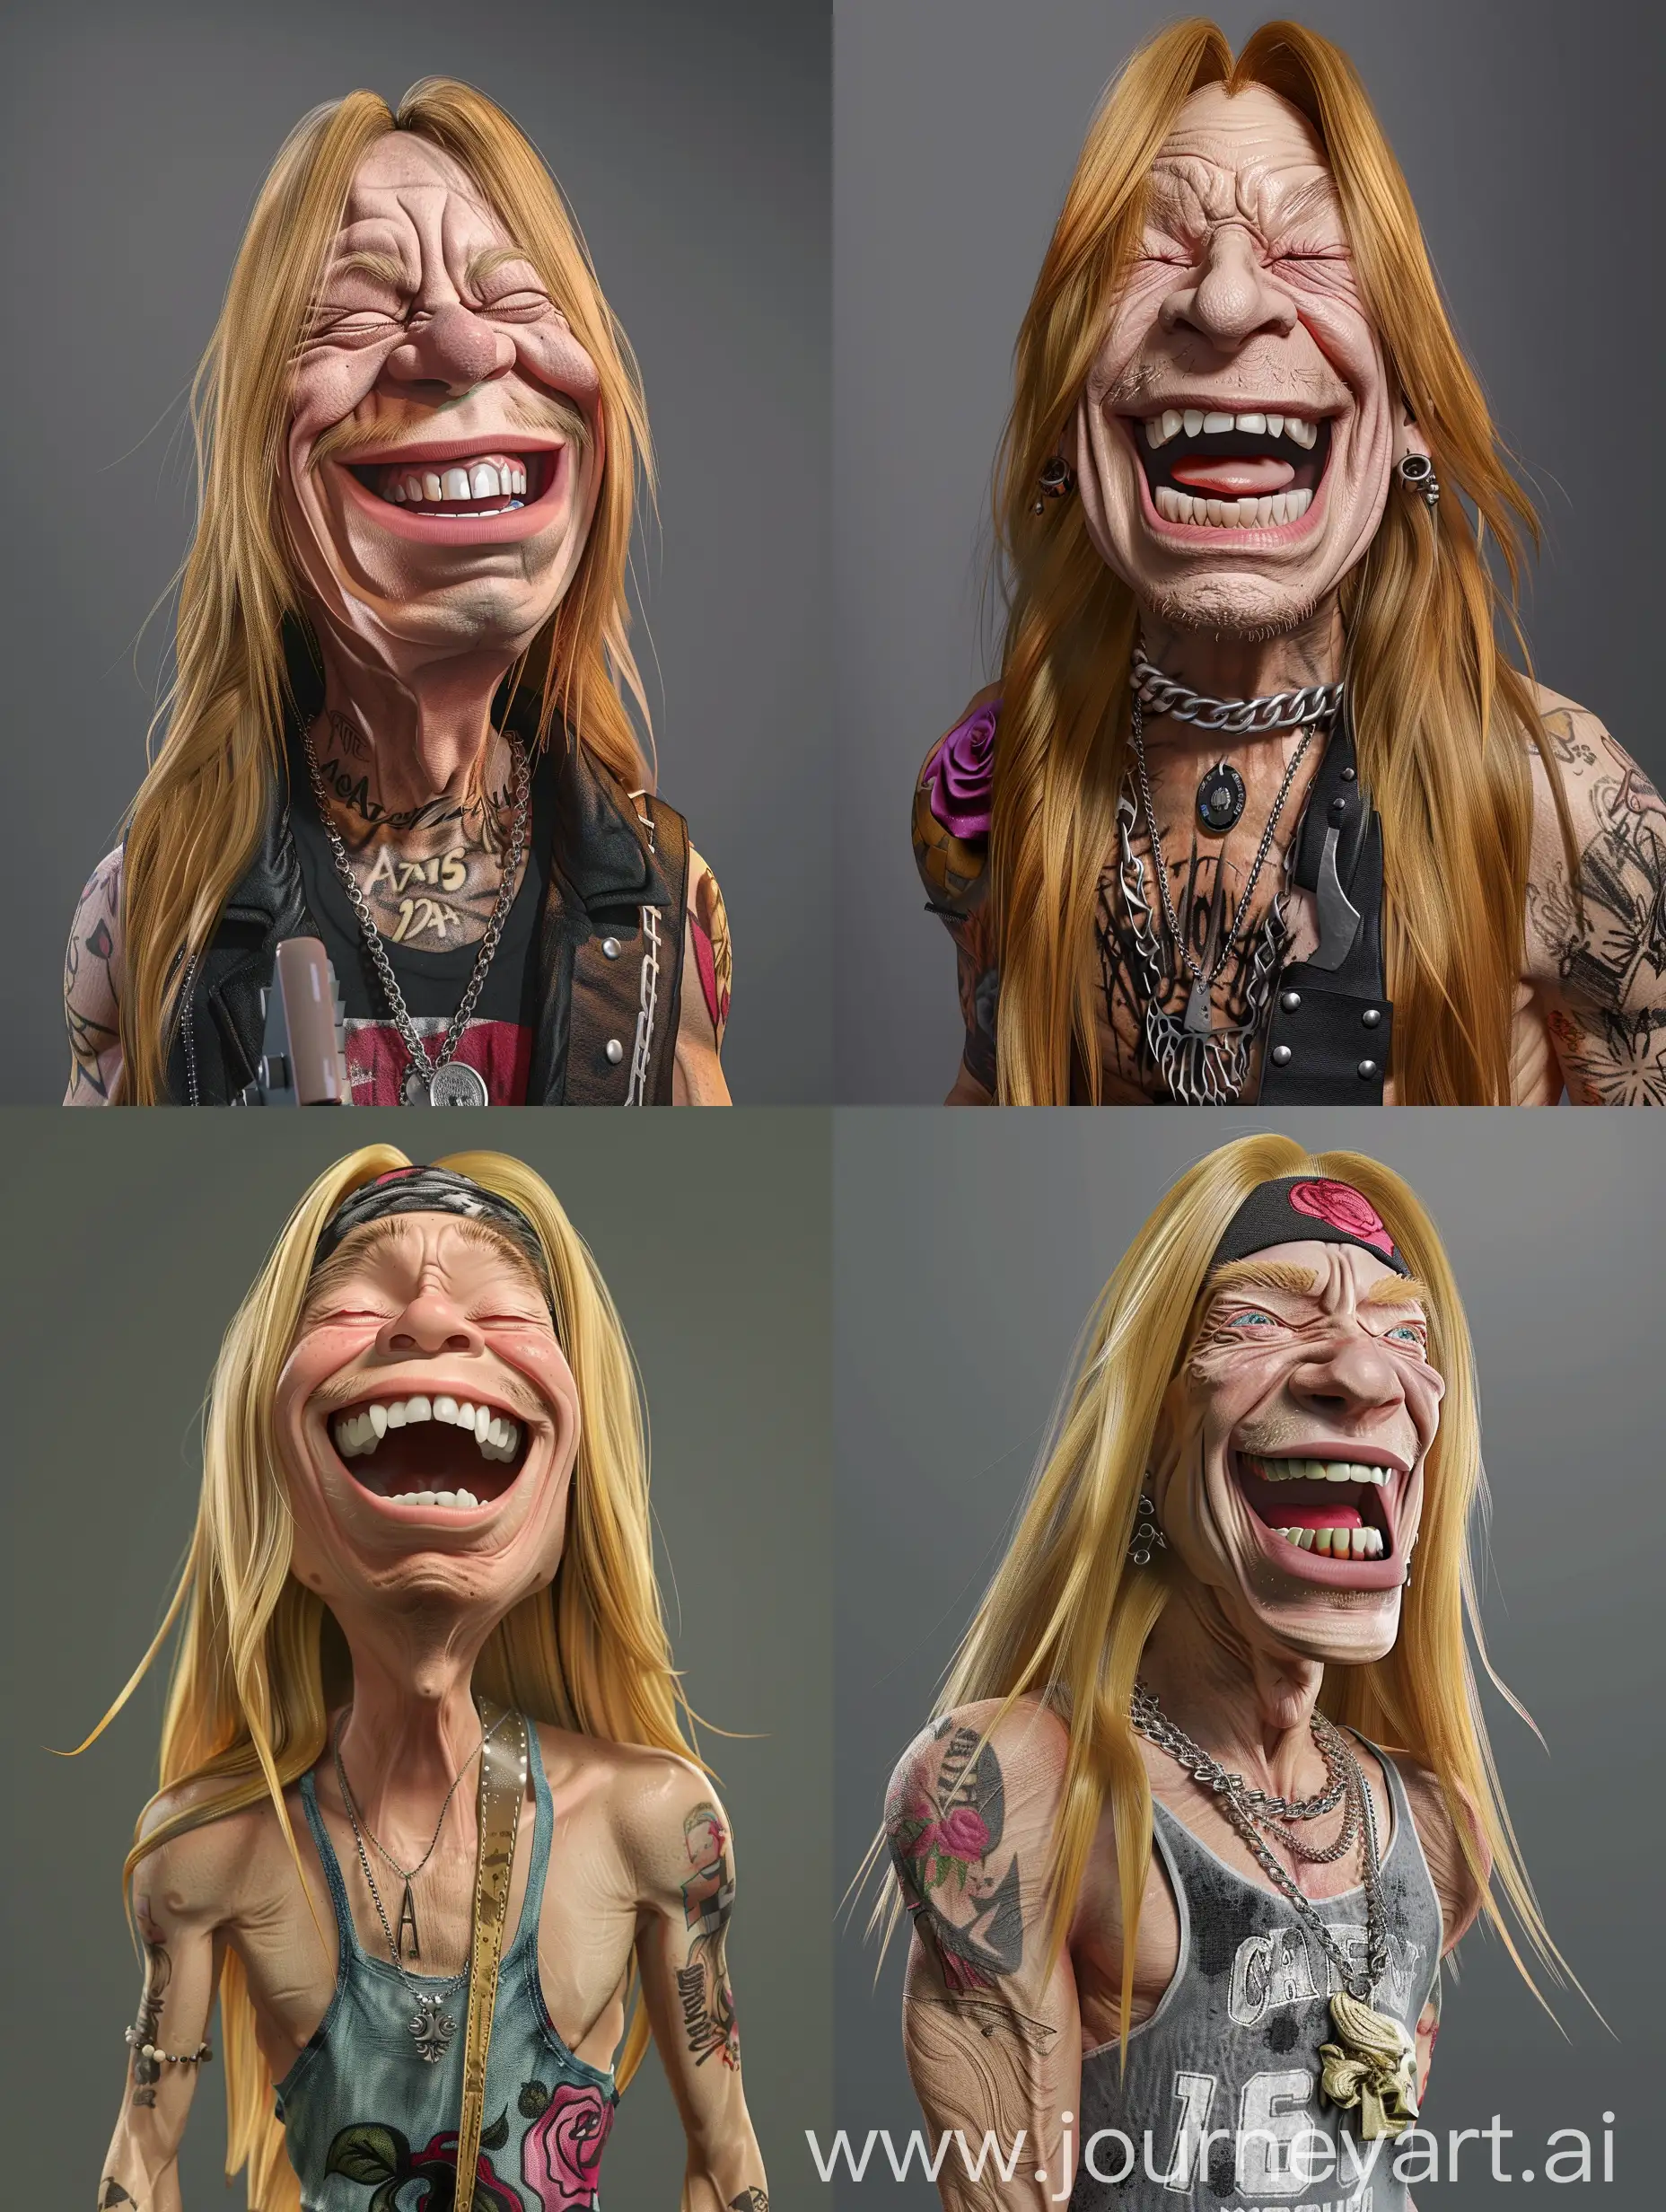 Axl-Rose-Cartoon-Caricature-Laughing-in-High-Resolution-3D-Render